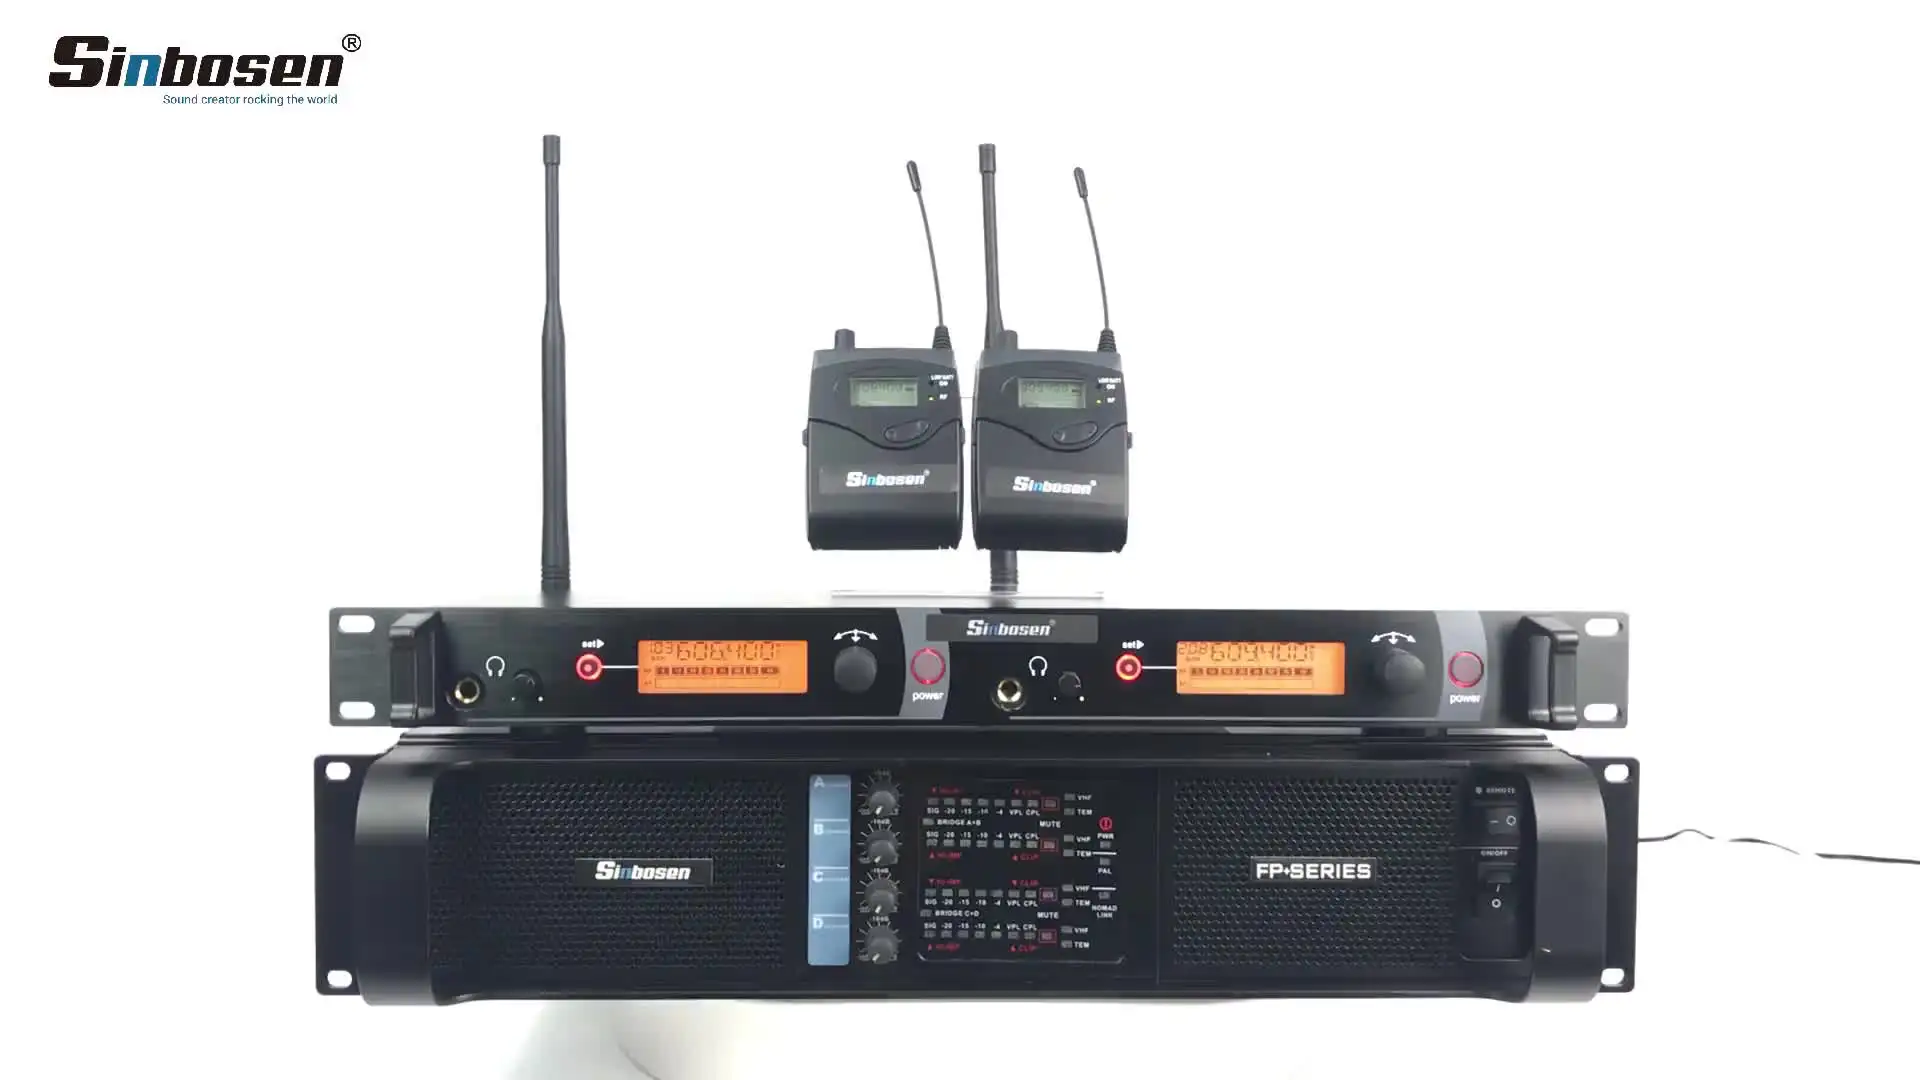 

Sound system DS-10Q pa system 4 channel amplifier M-2050 wireless microphone in ear monitor system